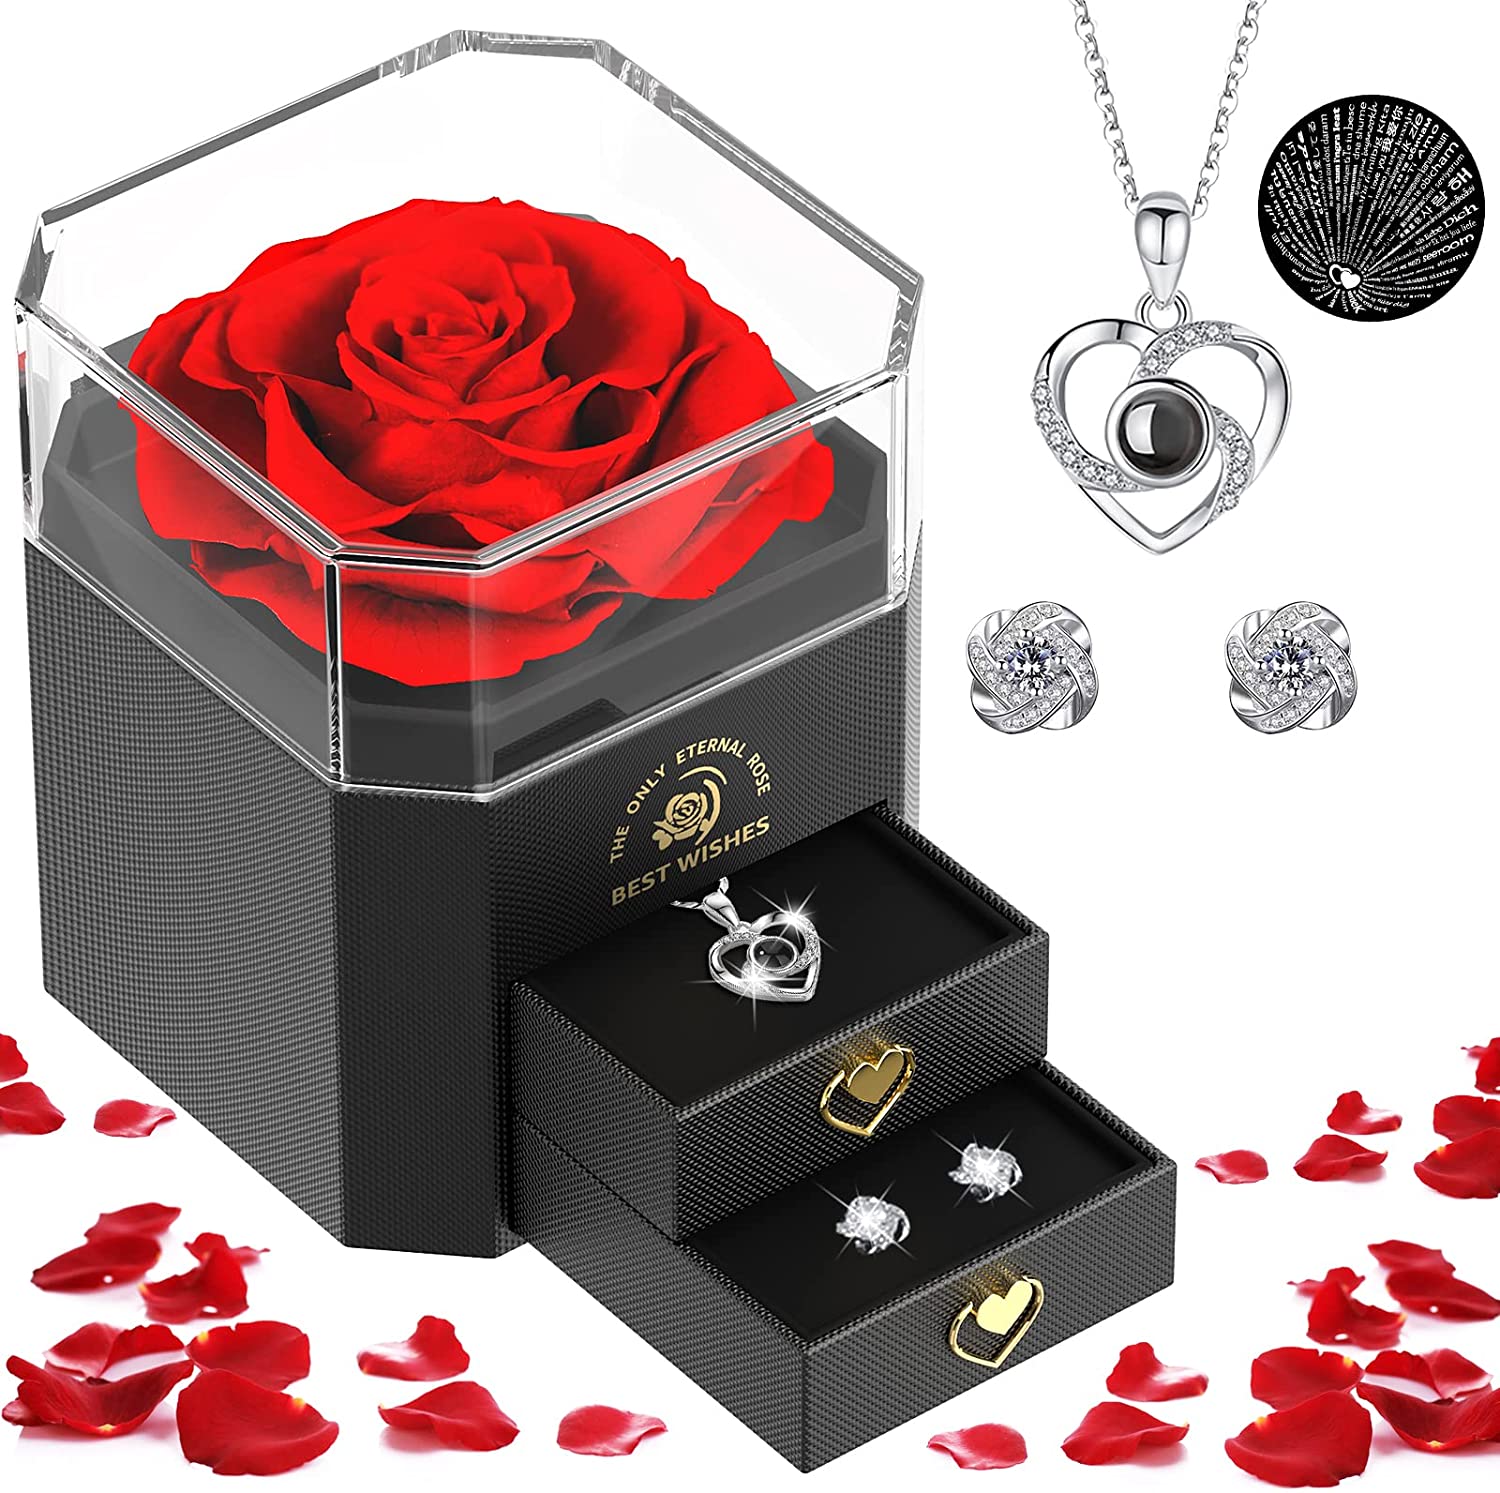 Preserved Real Rose, Handmade Eternal Rose Flower with I Love You Necklace and Earrings, Romantic Gifts for Her Wife Girlfriend Mum, Wedding Anniversary, Valentine‘s Day, Mother‘s Day, Birthday